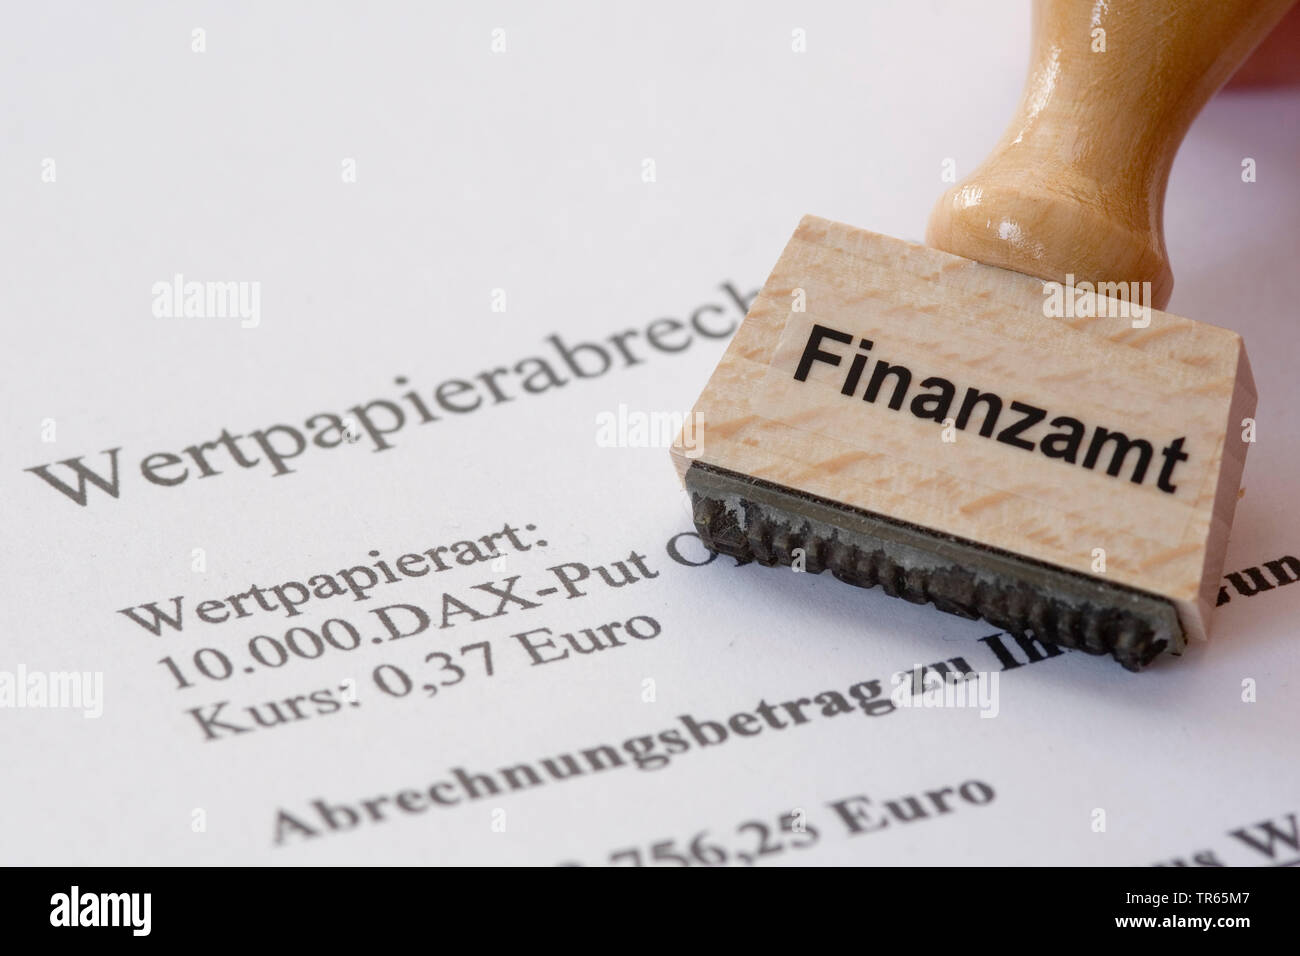 stamp with label Finanzamt, taxation office, flat rate withholding tax, Germany Stock Photo